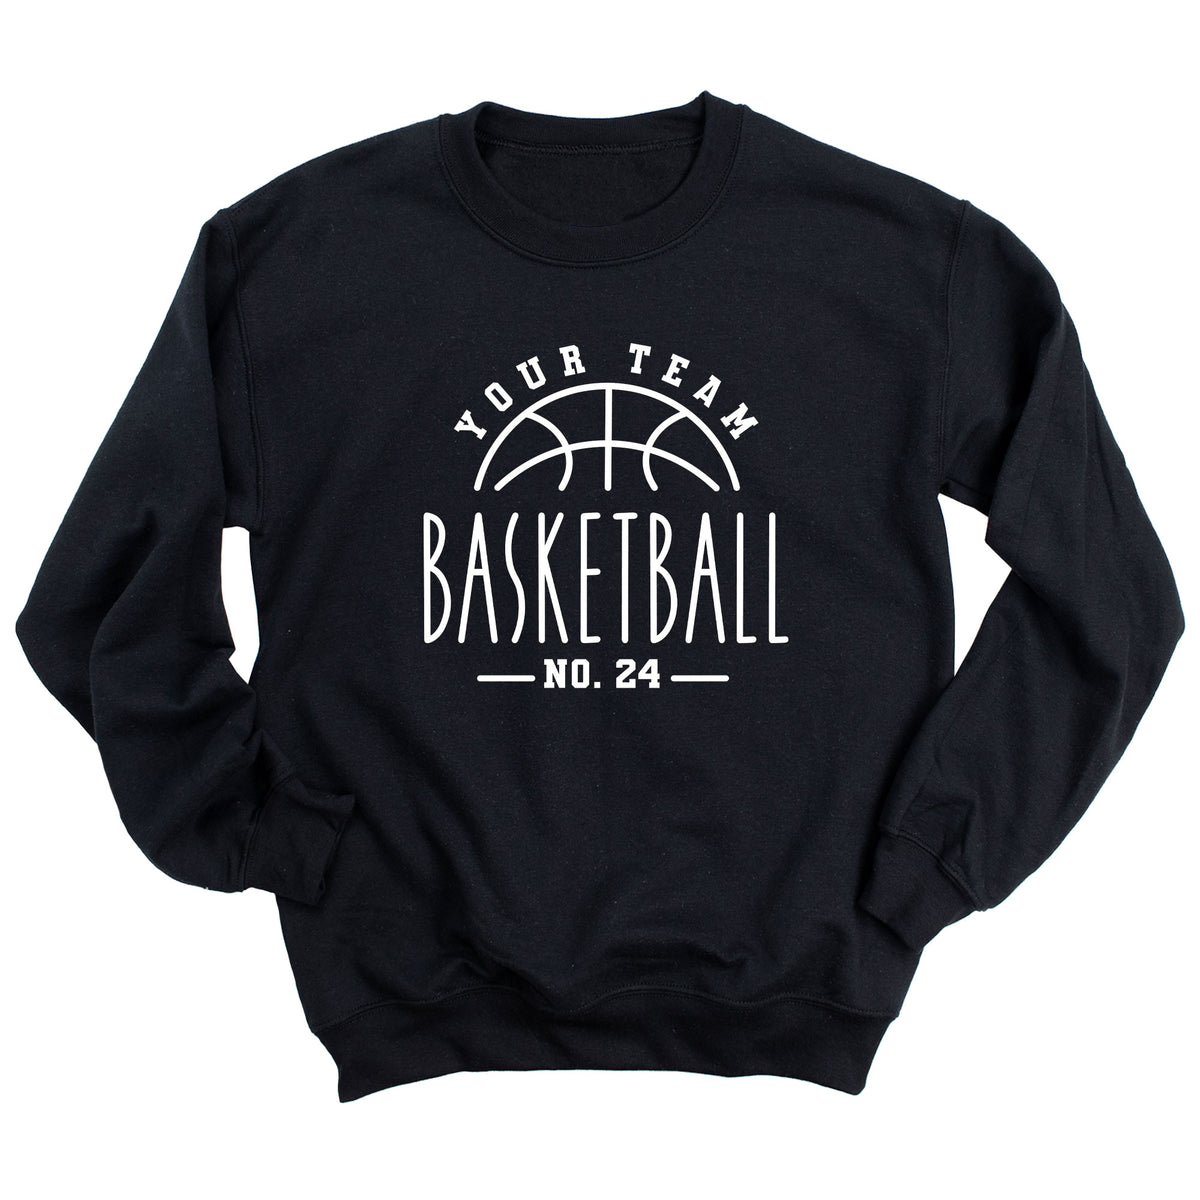 Your Team Basketball with Custom Number (Skinny Text) Sweatshirt